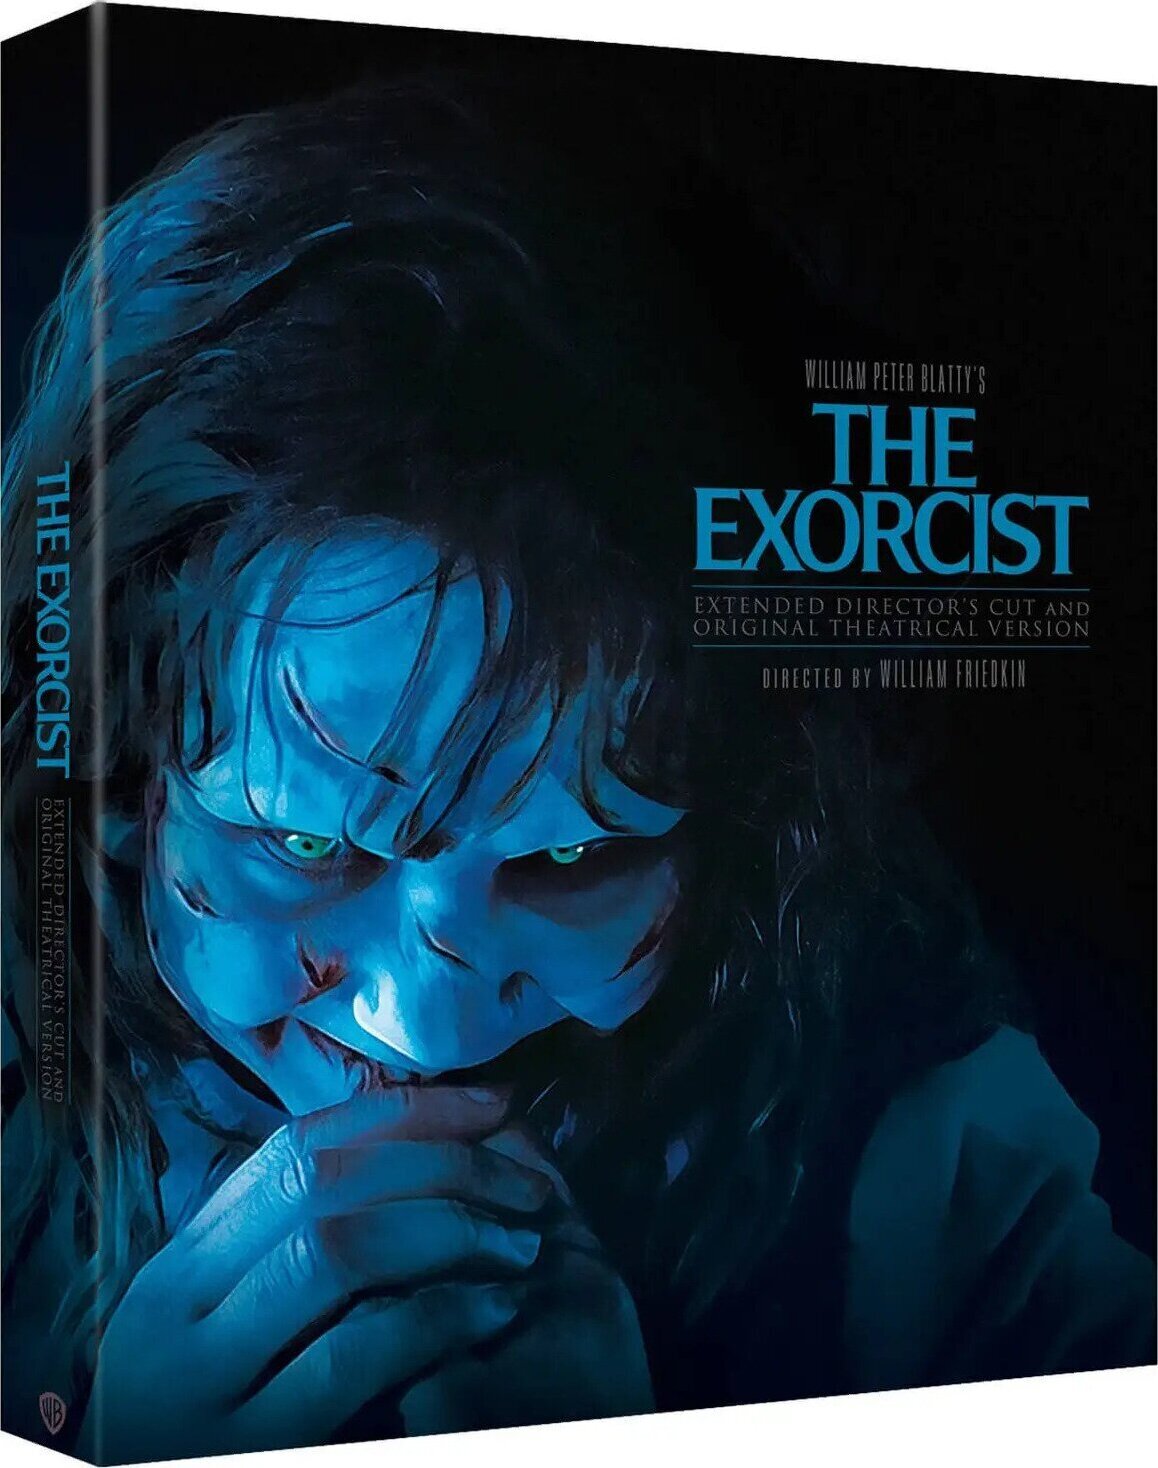 The Exorcist Ultimate Collectors Edition [Steelbook] [4K UHD] [UK]